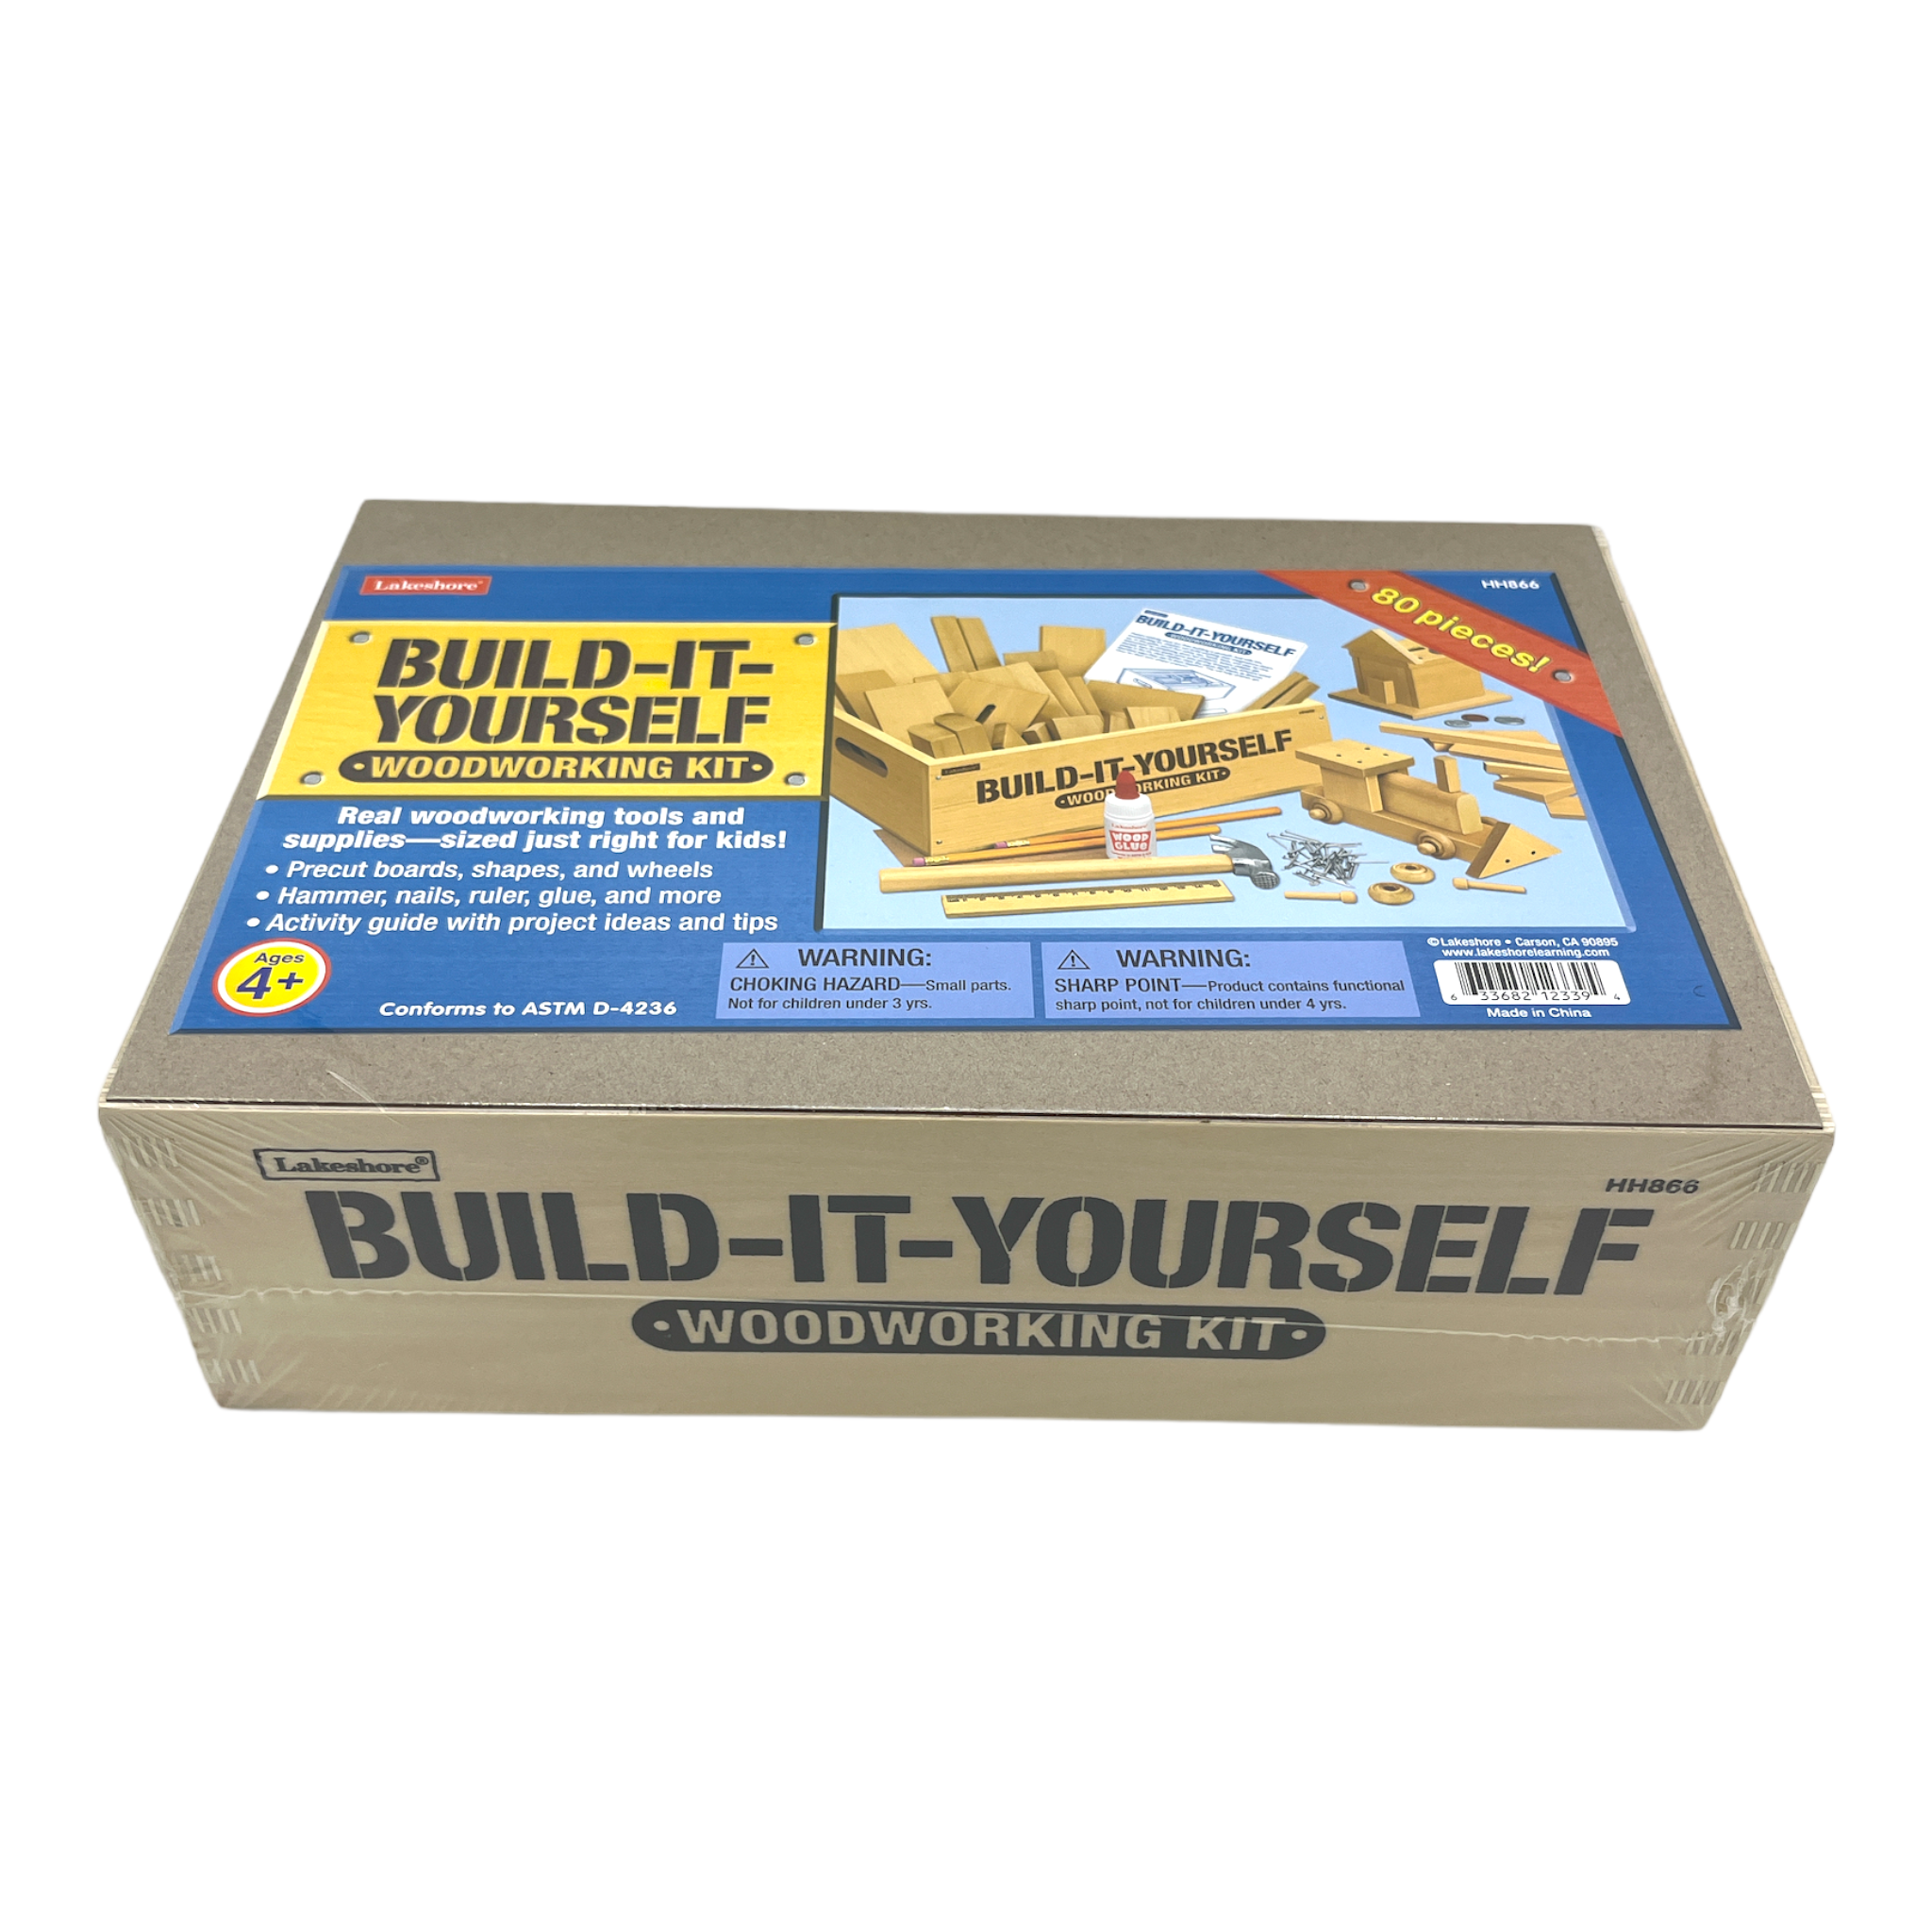 Lakeshore Build-It-Yourself Woodworking Kit – ToysCentral - Europe